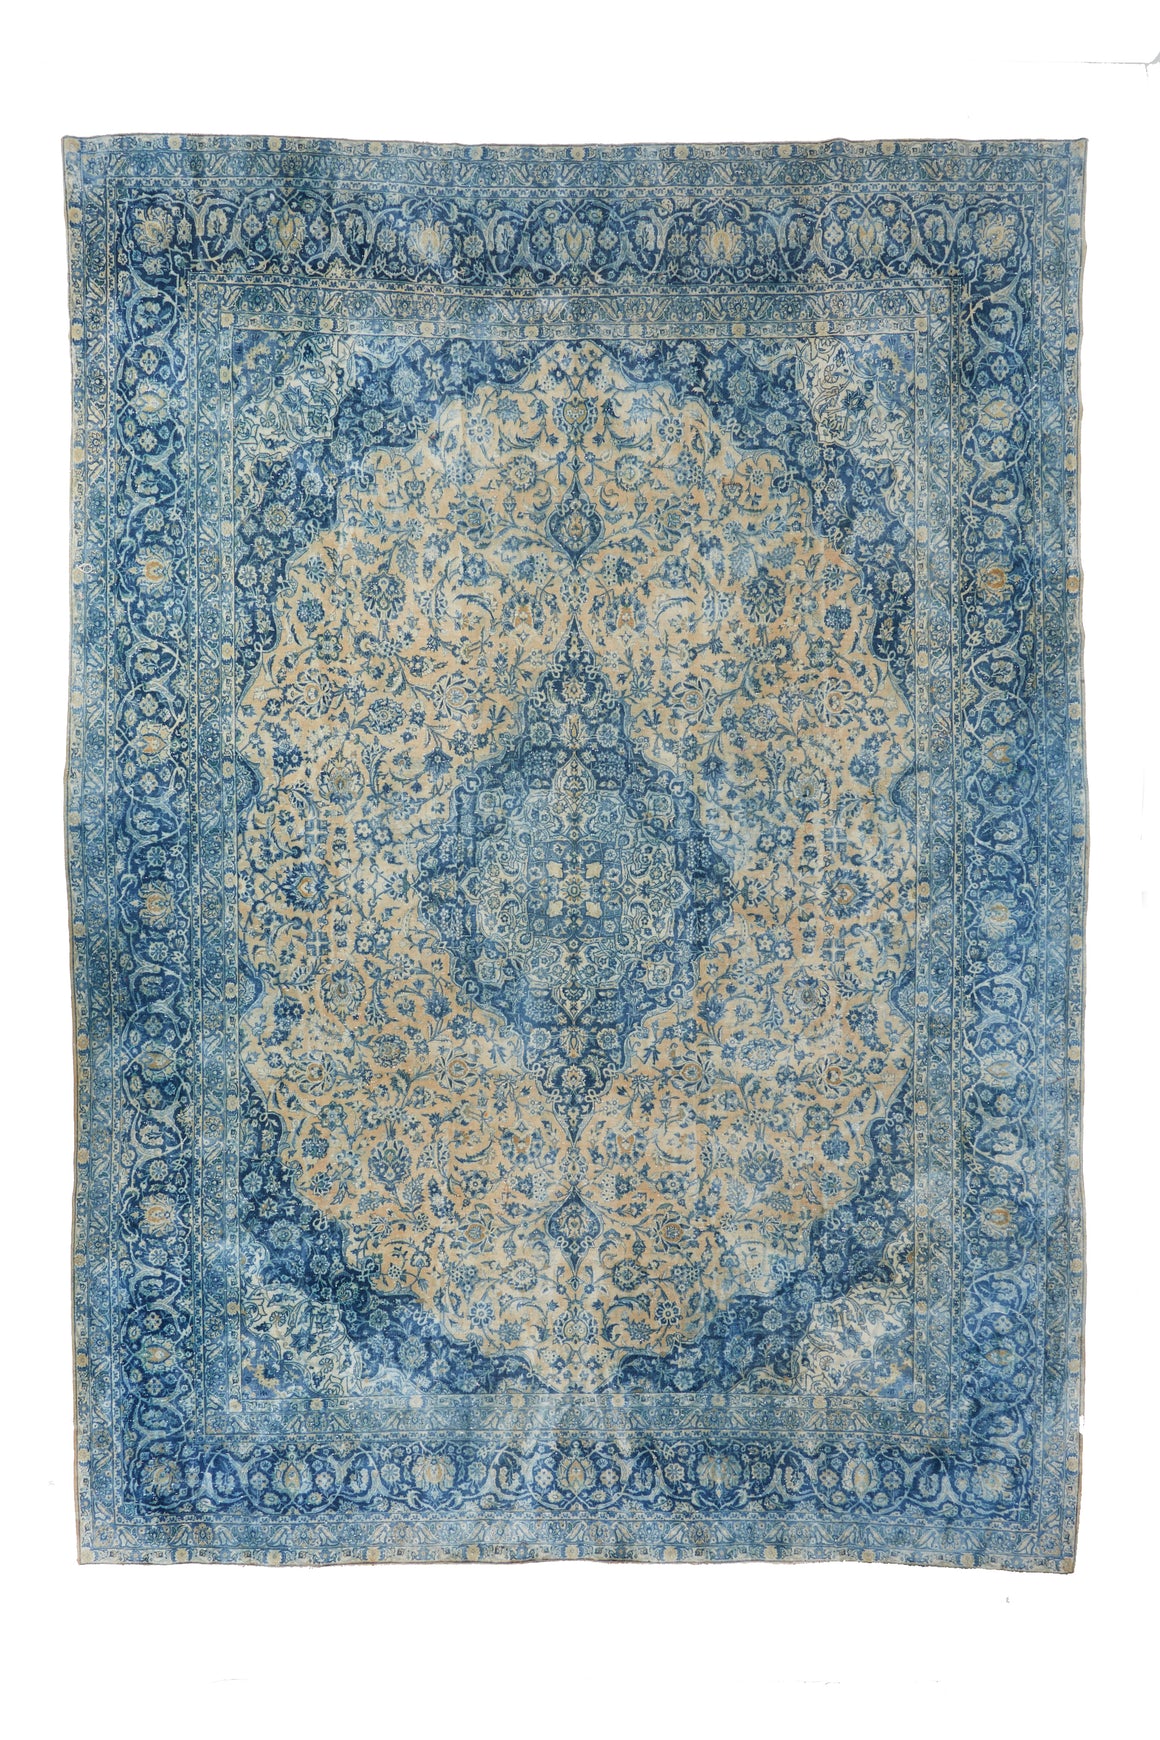 'Geranium' Palace-Sized Antique Area Rug - 10’6” x 15’ - Canary Lane - Curated Textiles